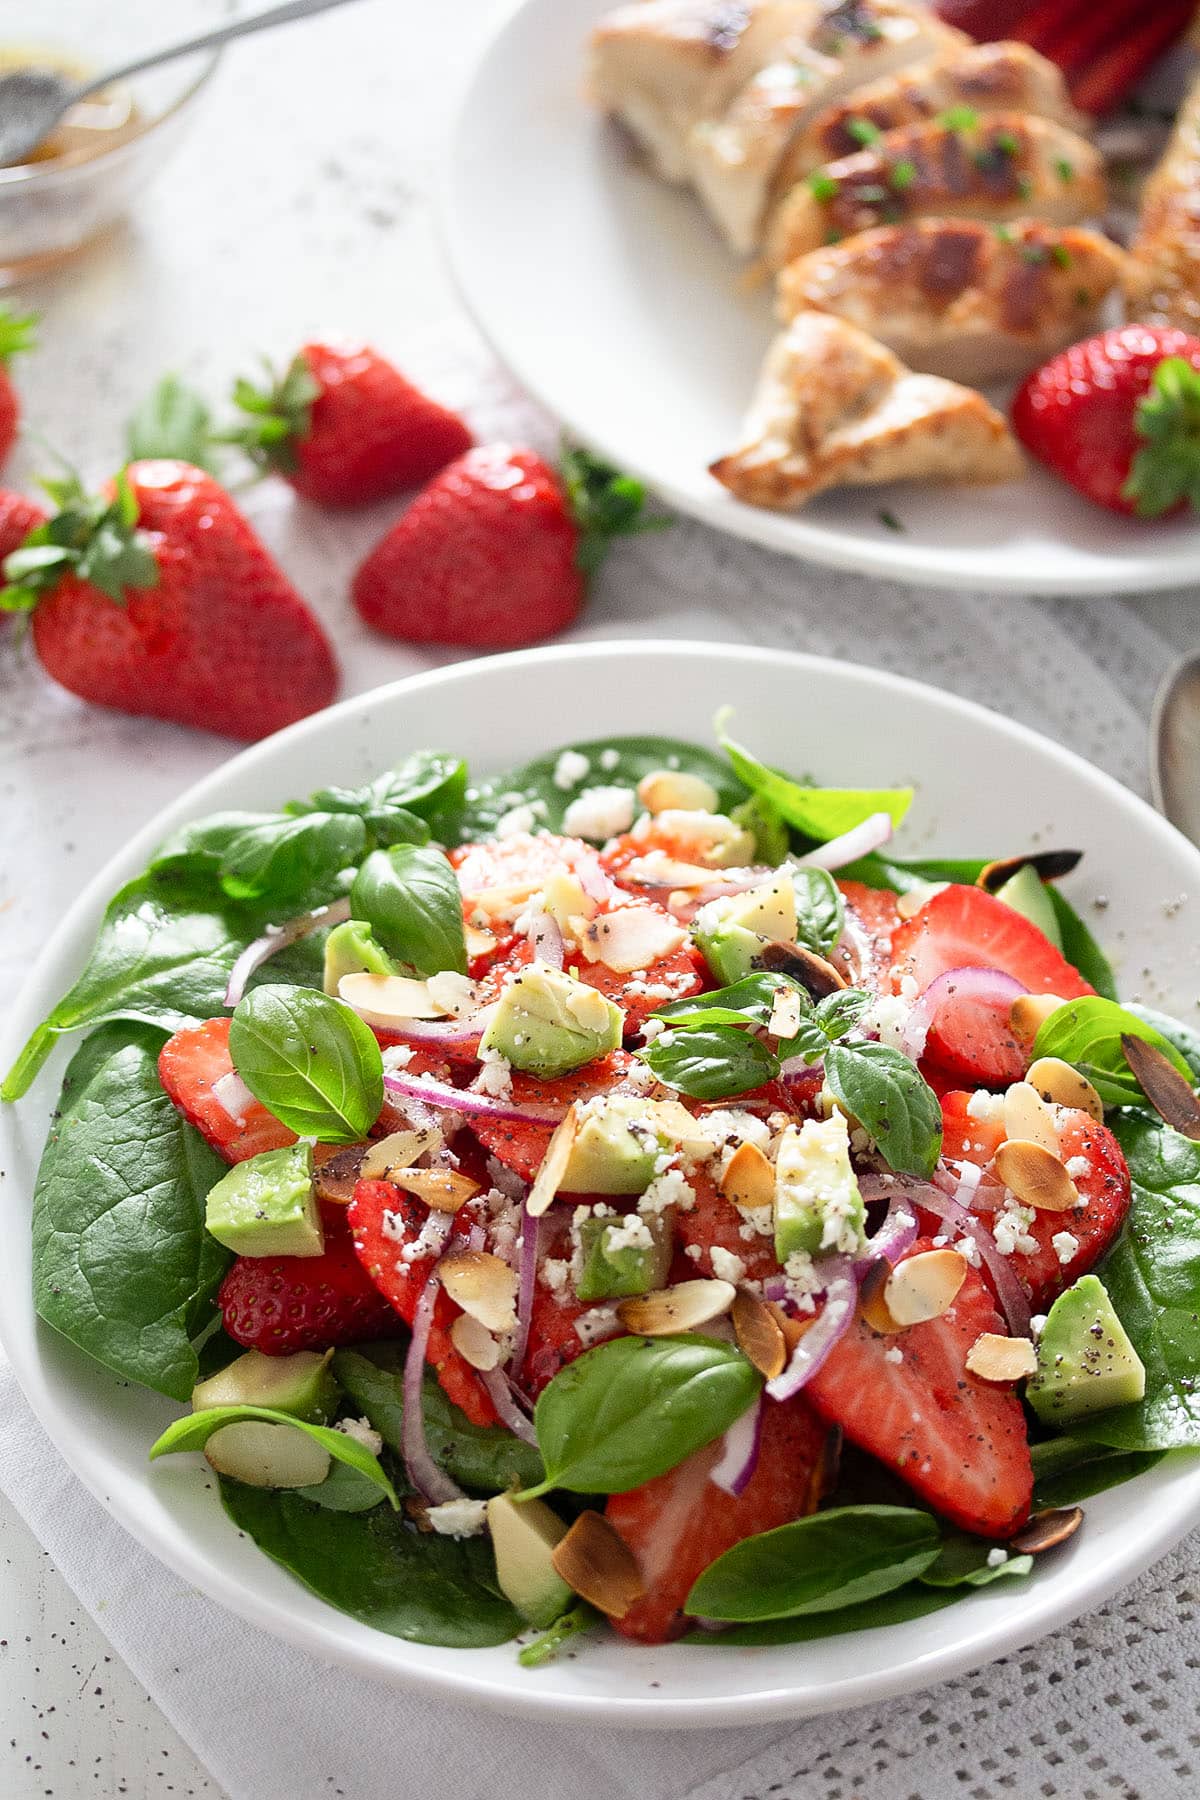 strawberry salad with goat cheese and almonds on a plate, fresh strawberries and grilled chicken breast behind it.